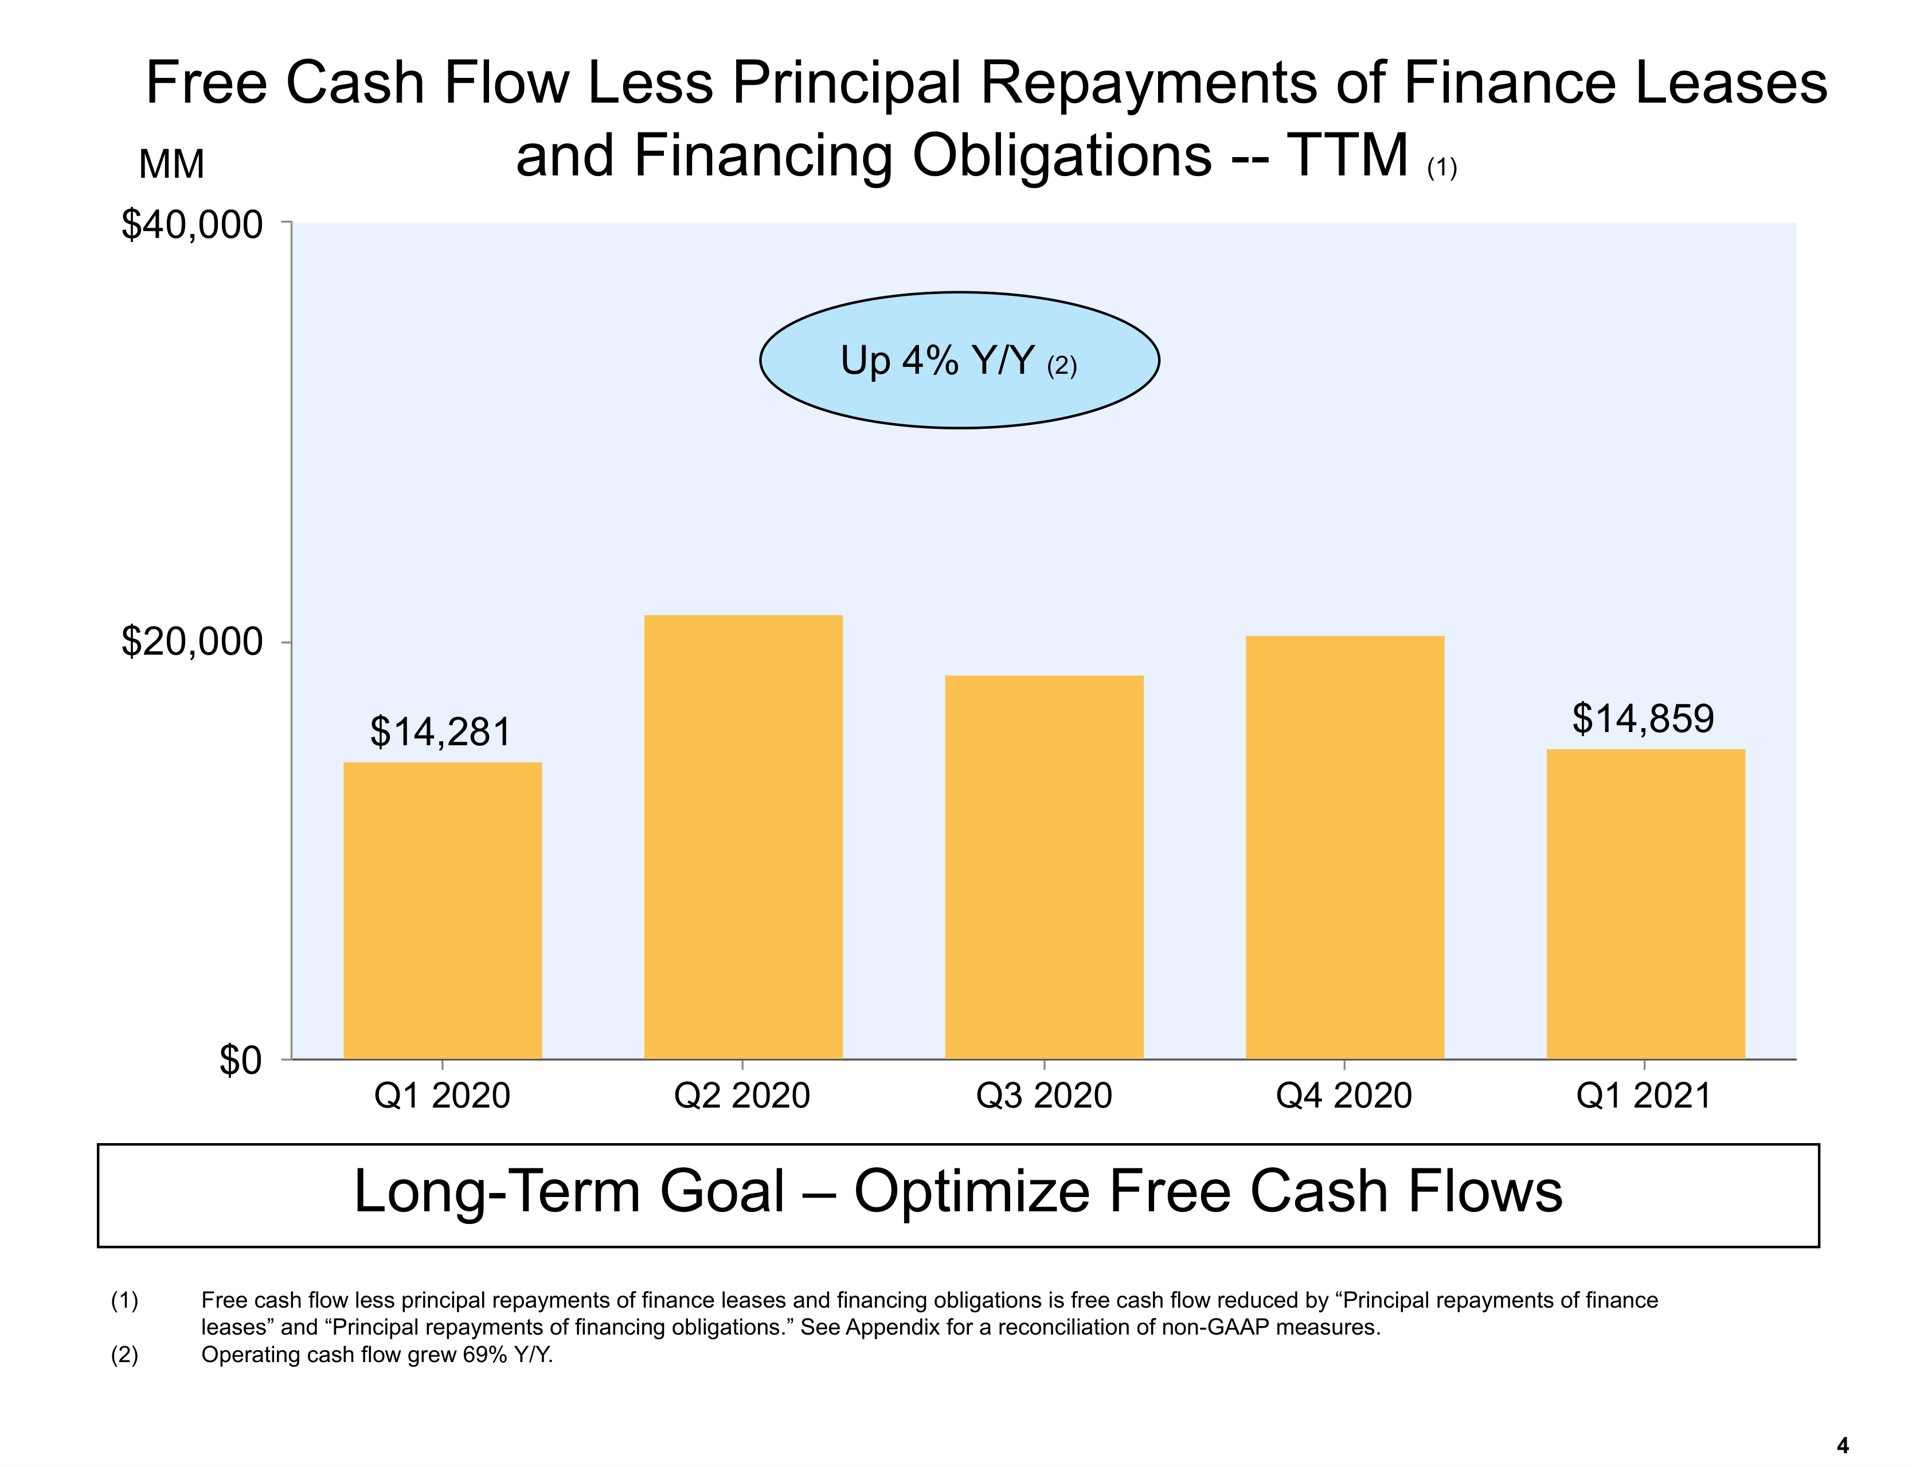 free cash flow less principal repayments of finance leases and financing obligations long term goal optimize free cash flows | Amazon